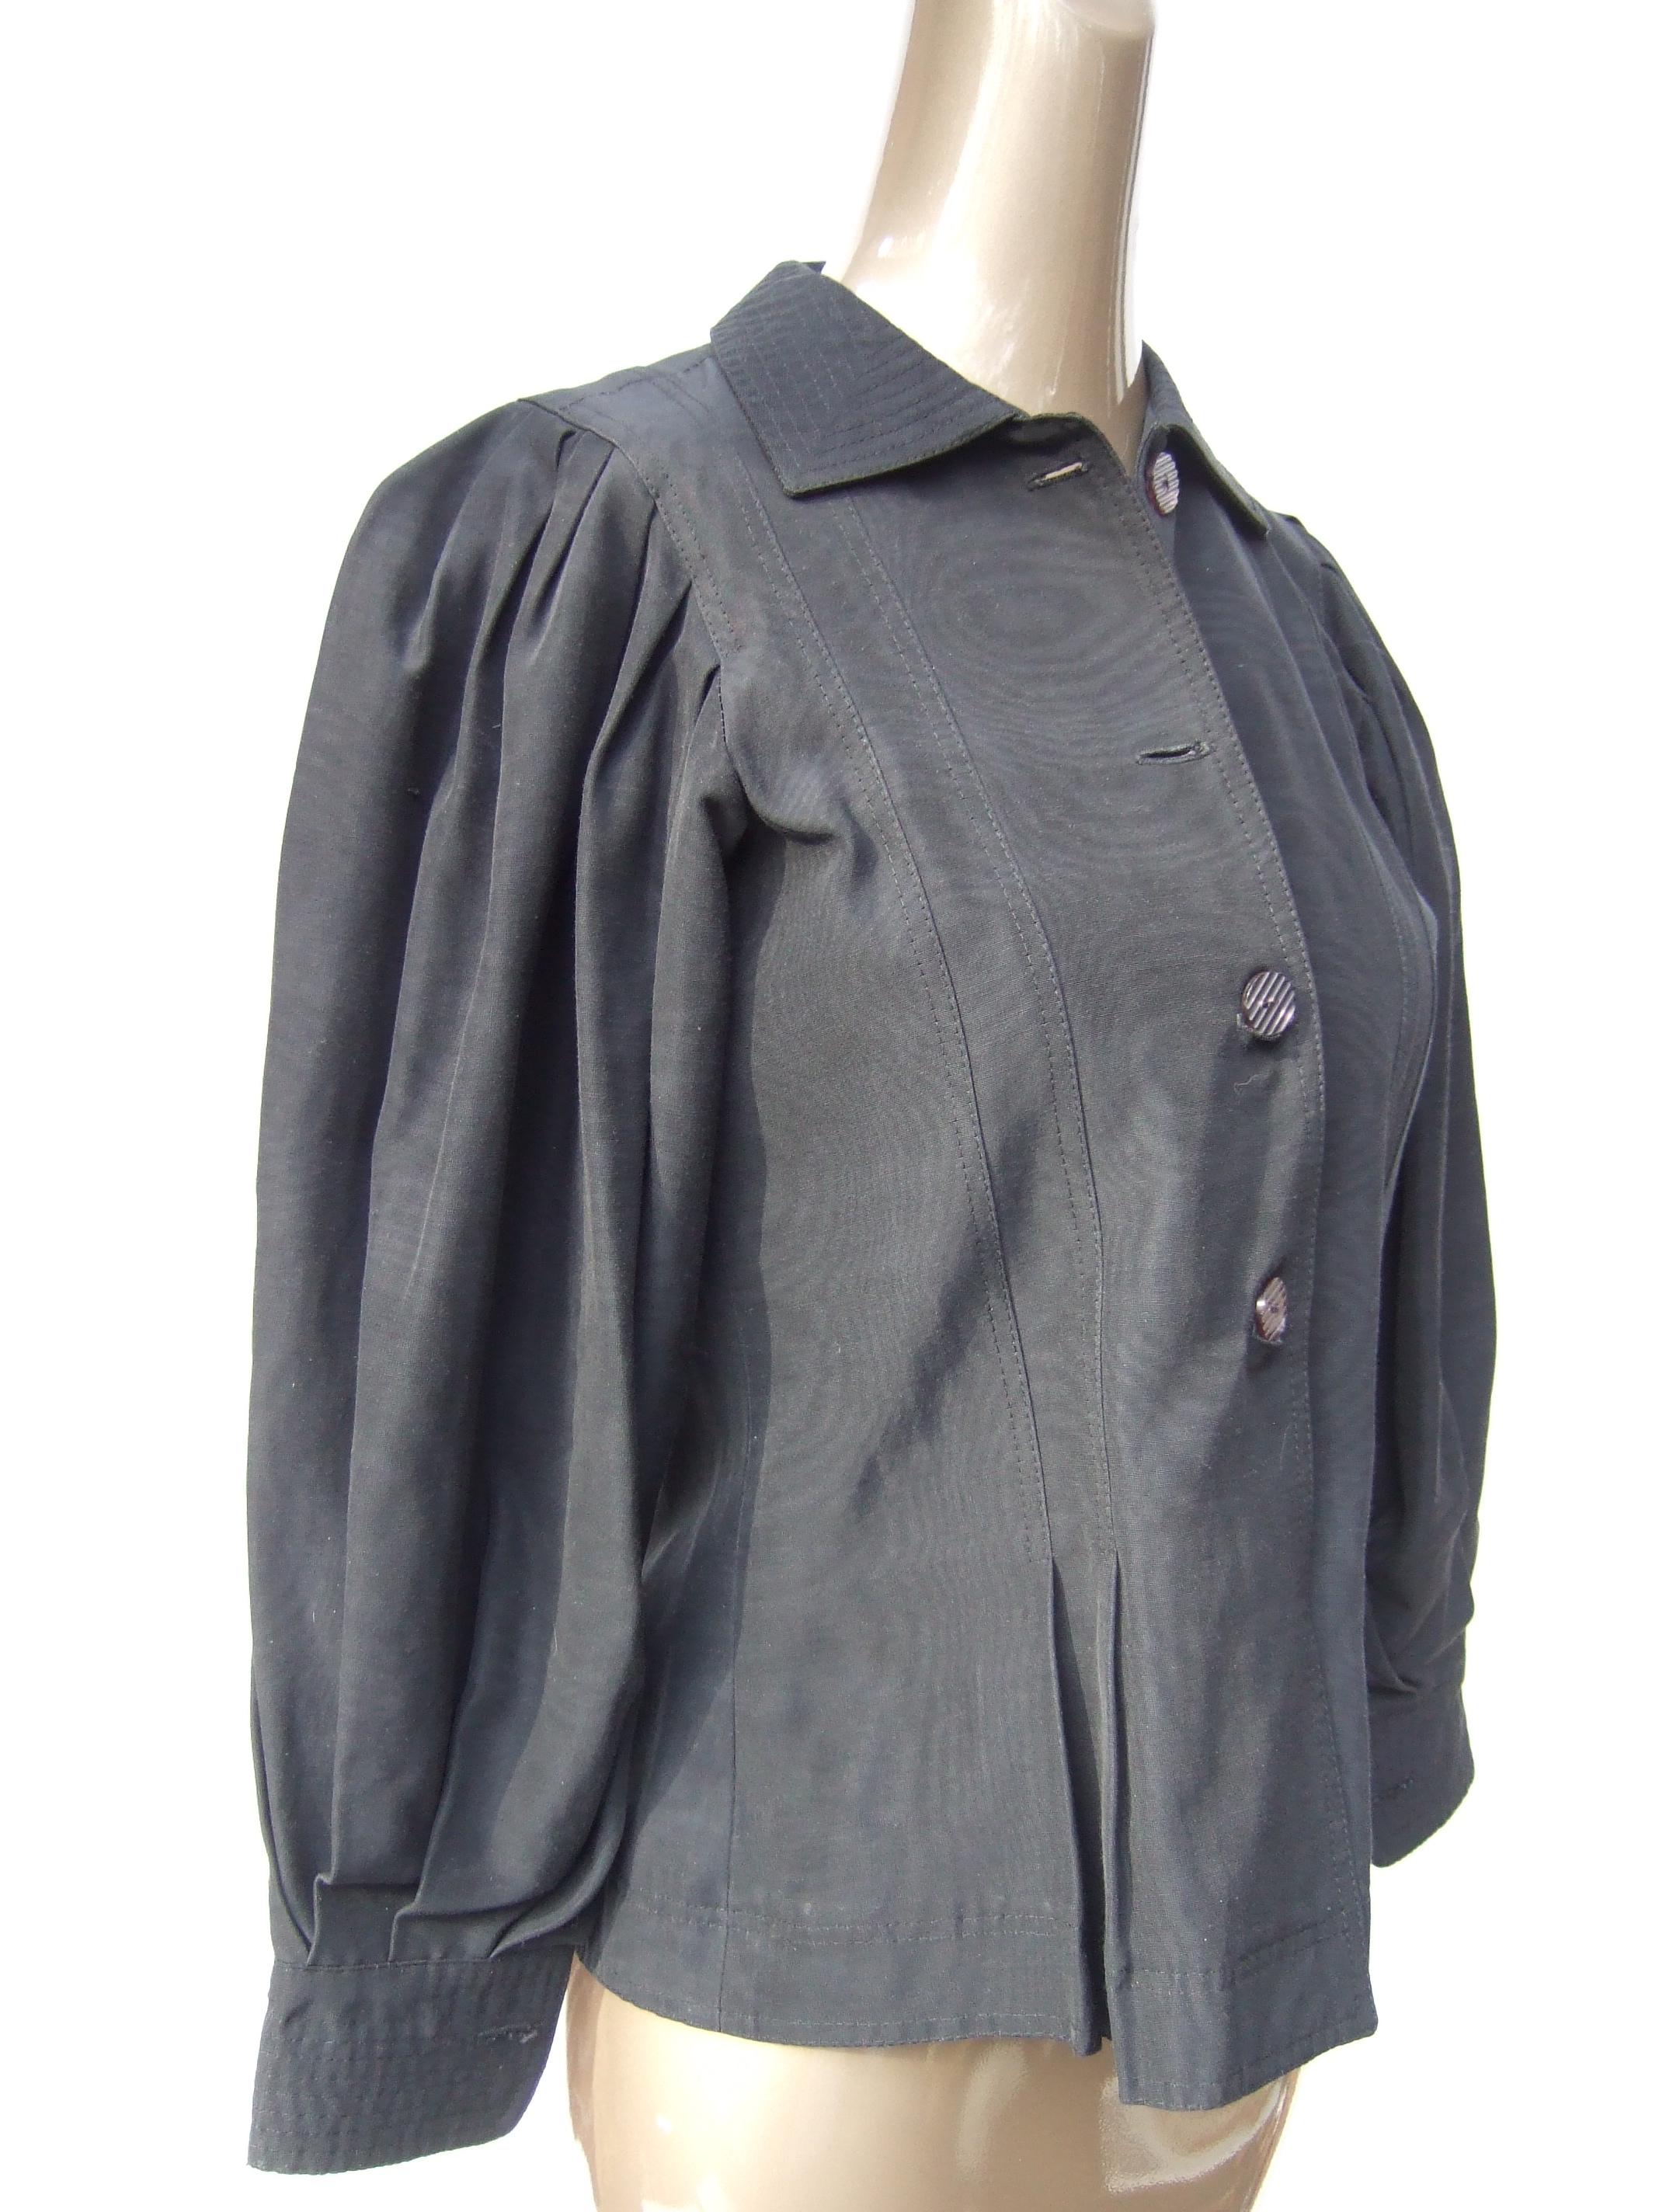 Jean Muir London Black Fitted Jacket for Neiman-Marcus c 1970s For Sale 1